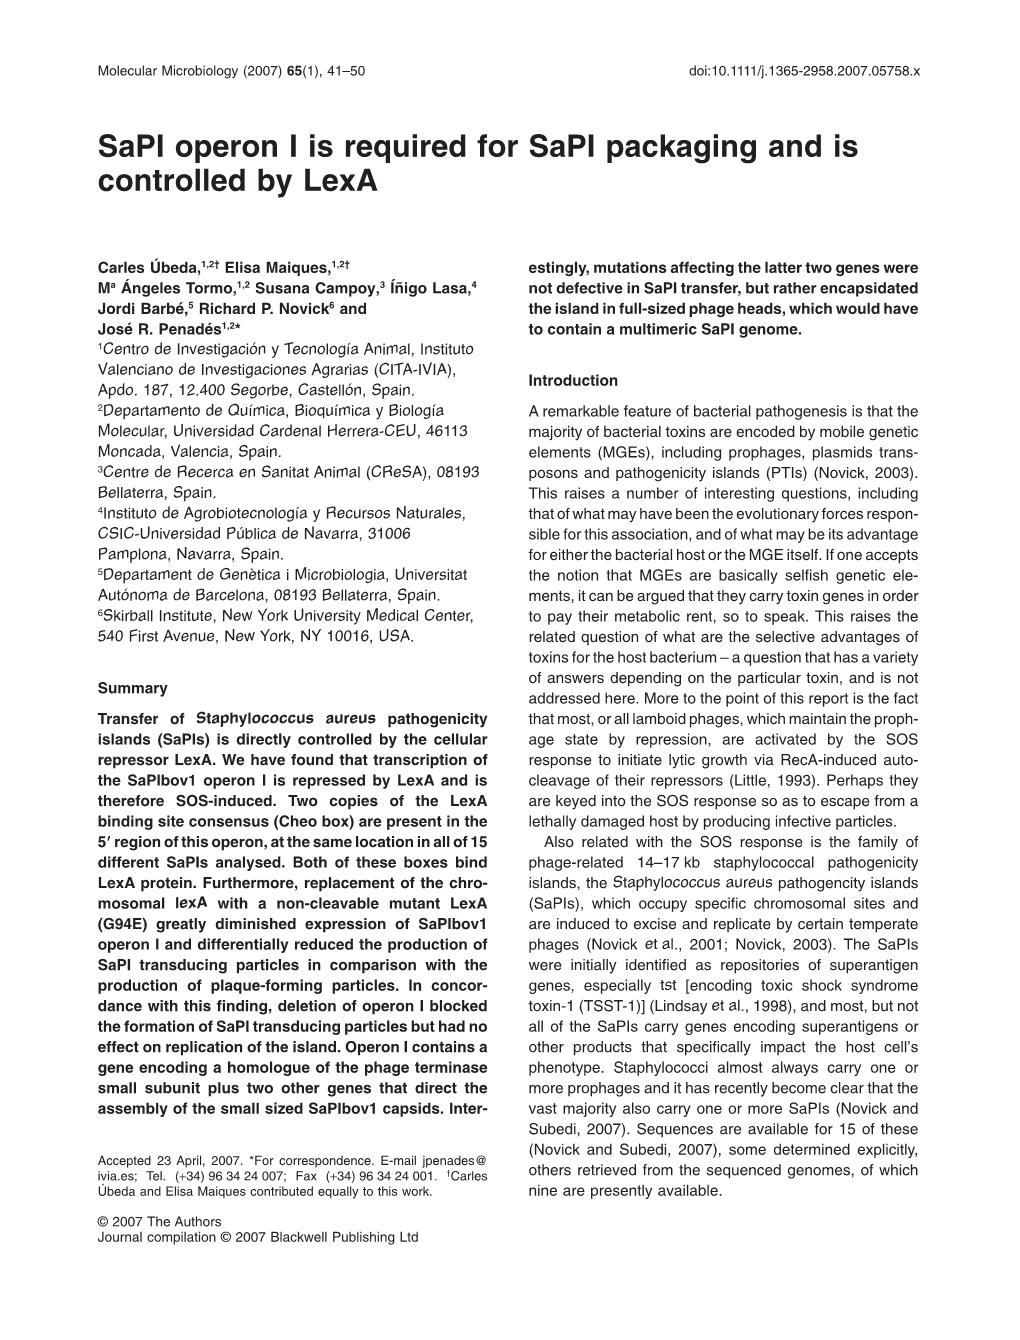 Sapi Operon I Is Required for Sapi Packaging and Is Controlled by Lexa